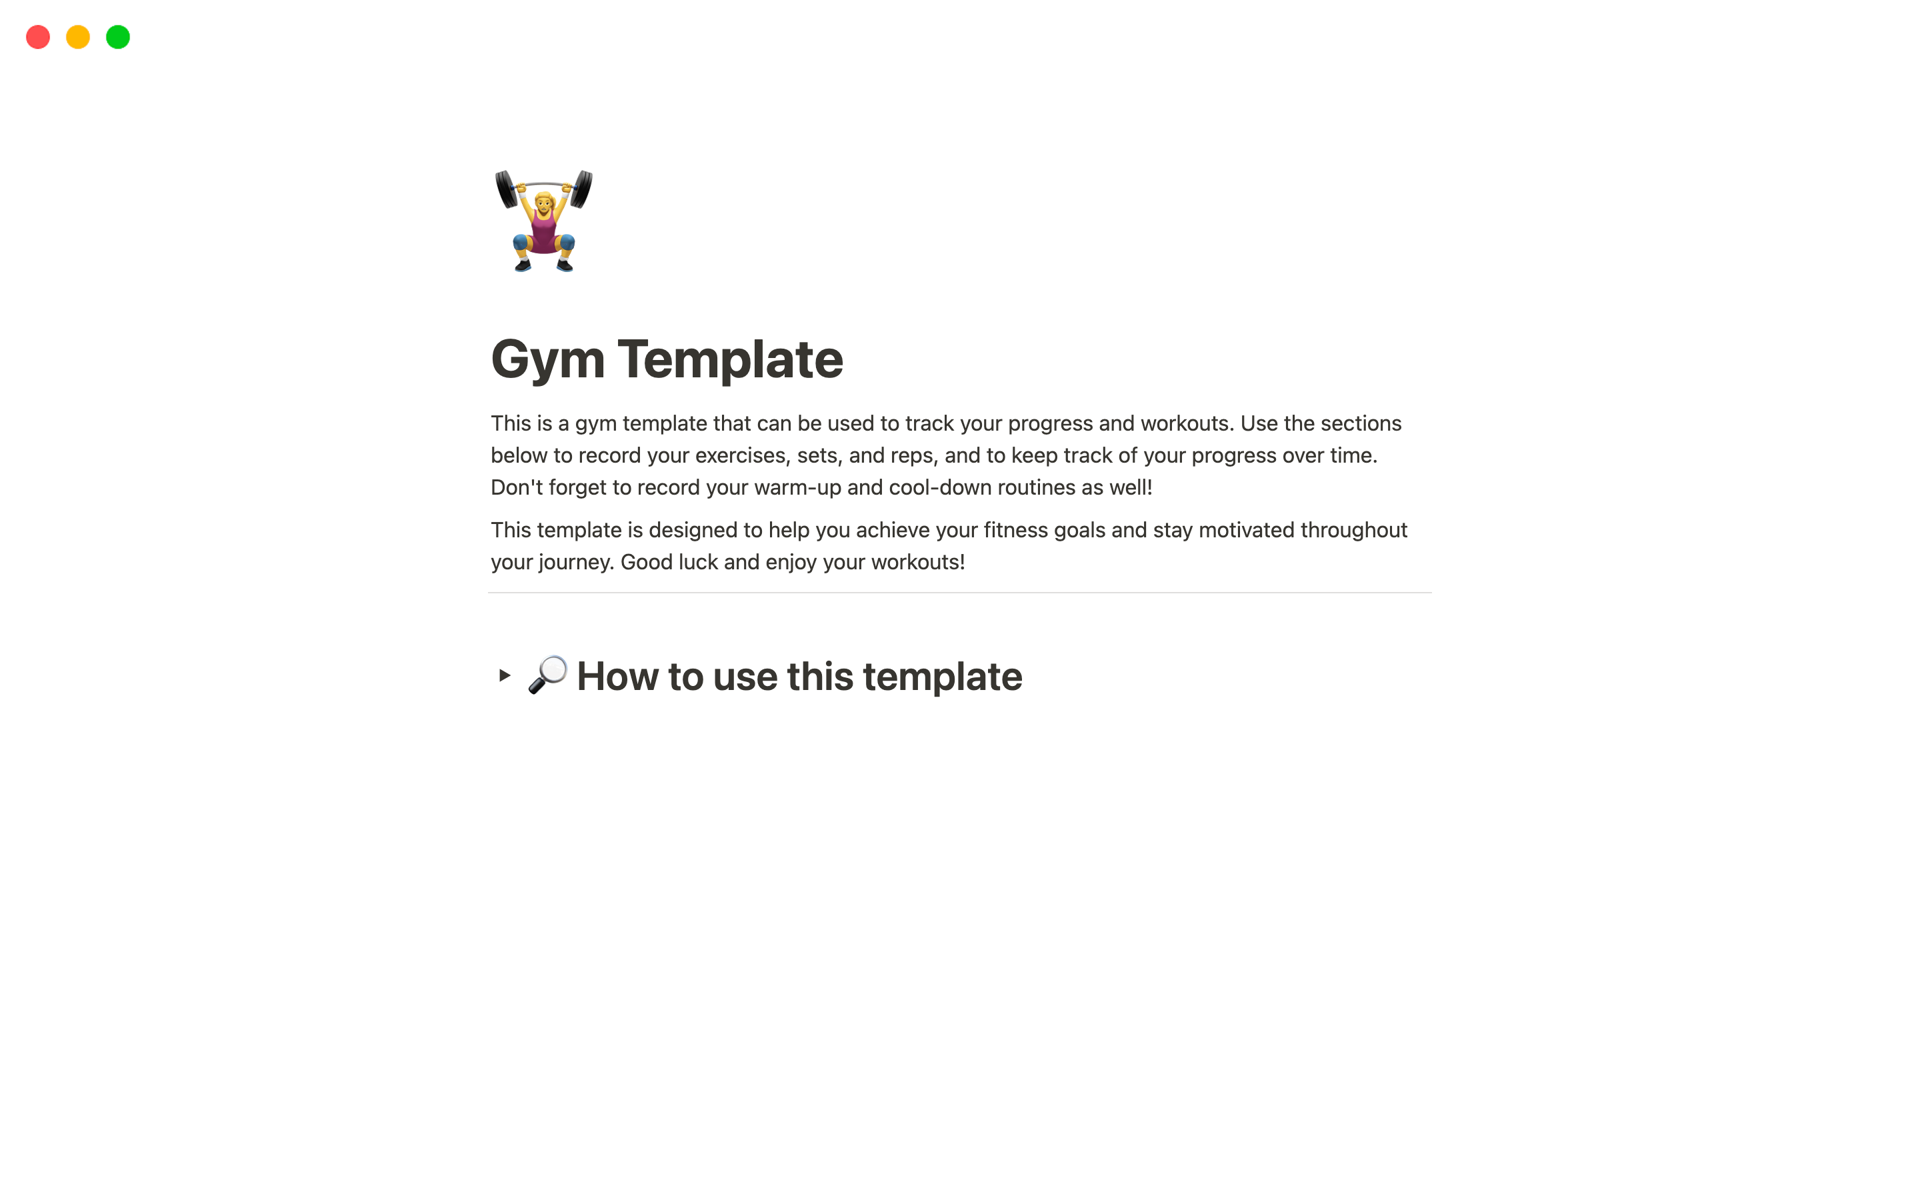 This template is designed to help you achieve your fitness goals and stay motivated throughout your journey. Good luck and enjoy your workouts!